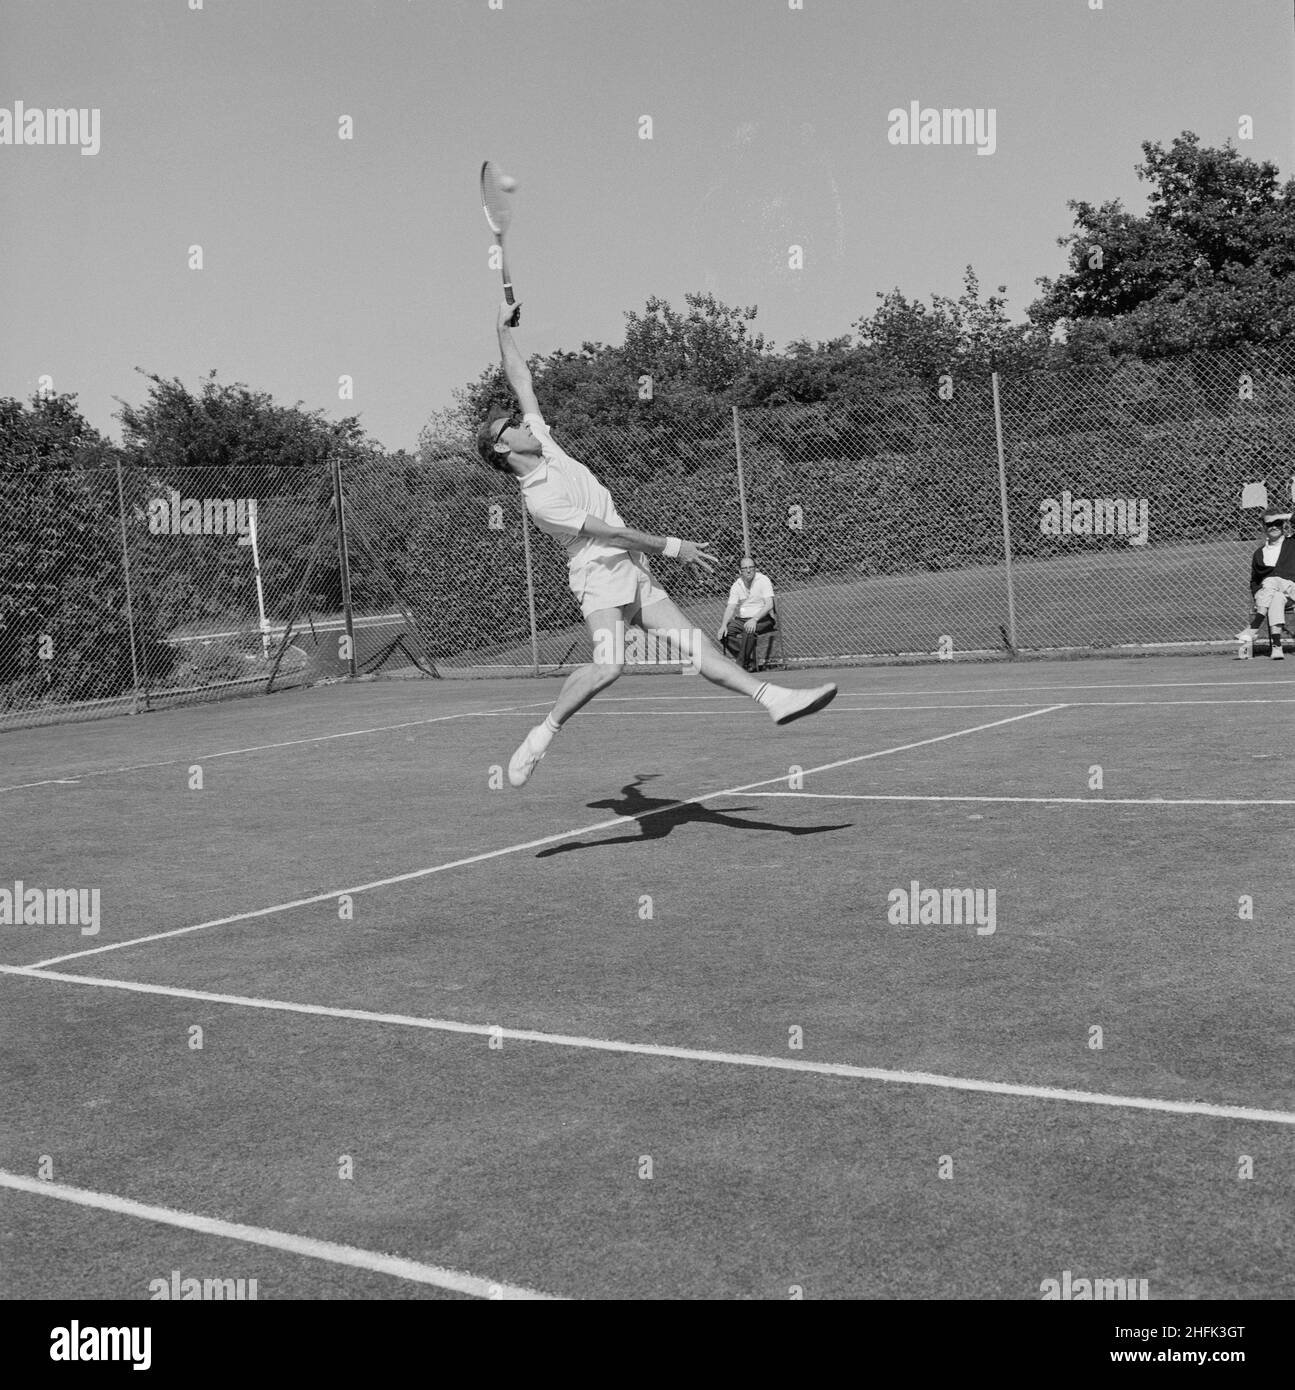 Laing Sports Ground, Rowley Lane, Elstree, Barnet, London, 11/06/1970. A man jumping to hit a tennis ball during a match at the Finals Day of the Laing Tennis Section held at the Laing Sports Ground at Elstree. The 1970 Finals Day of the Laing Sports Club Tennis Section was held on 11th June. The trophies were presented by Lillian Martin. Stock Photo